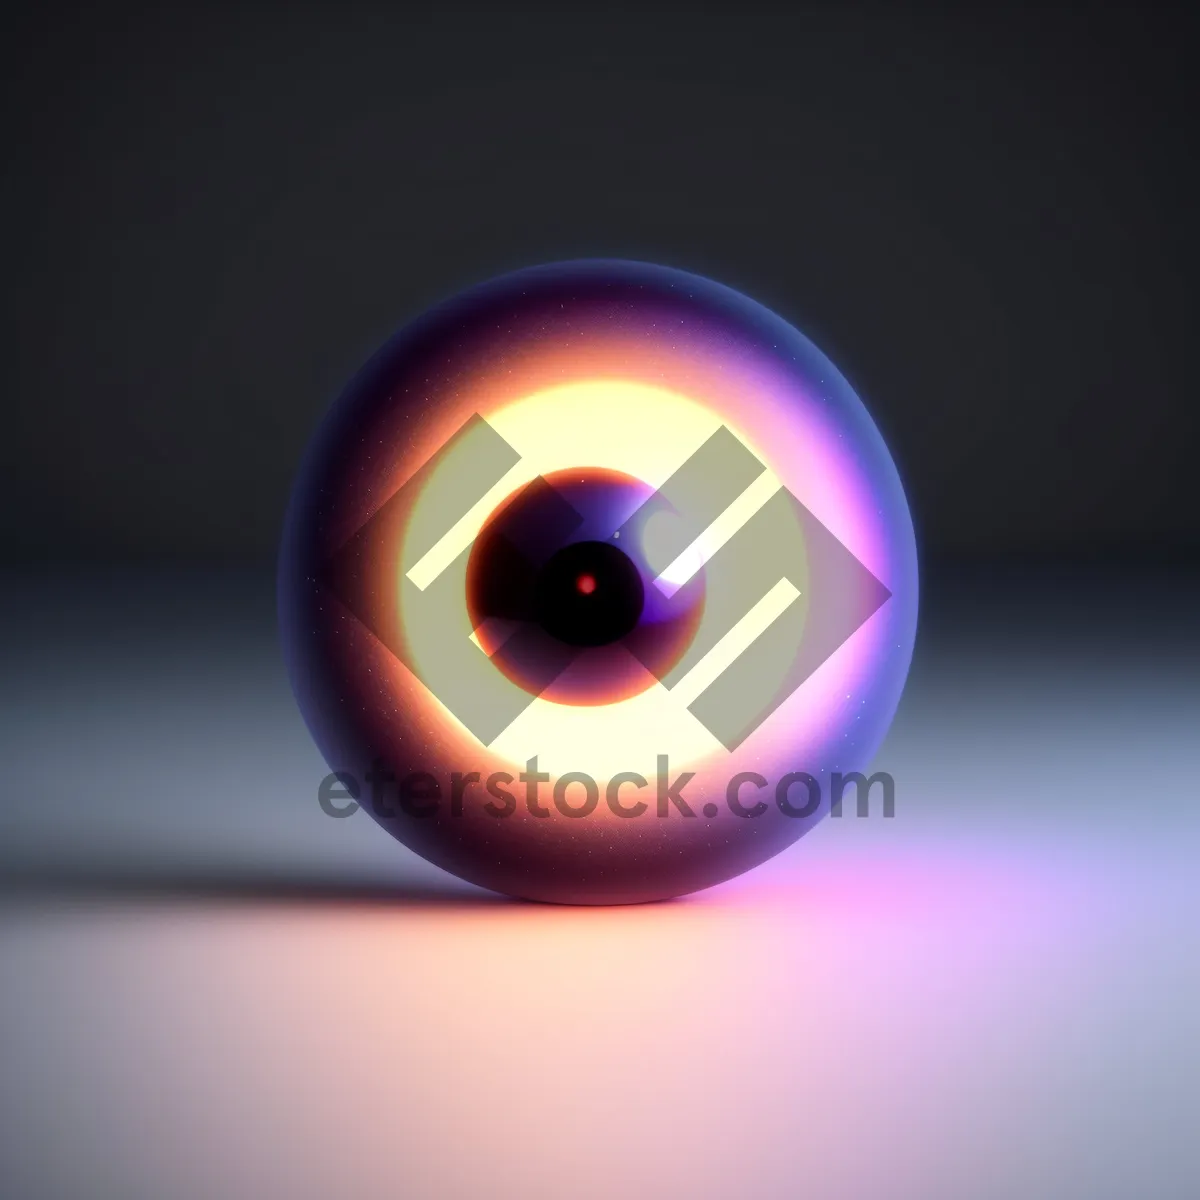 Picture of Vibrant Glass Button with Shiny Reflection